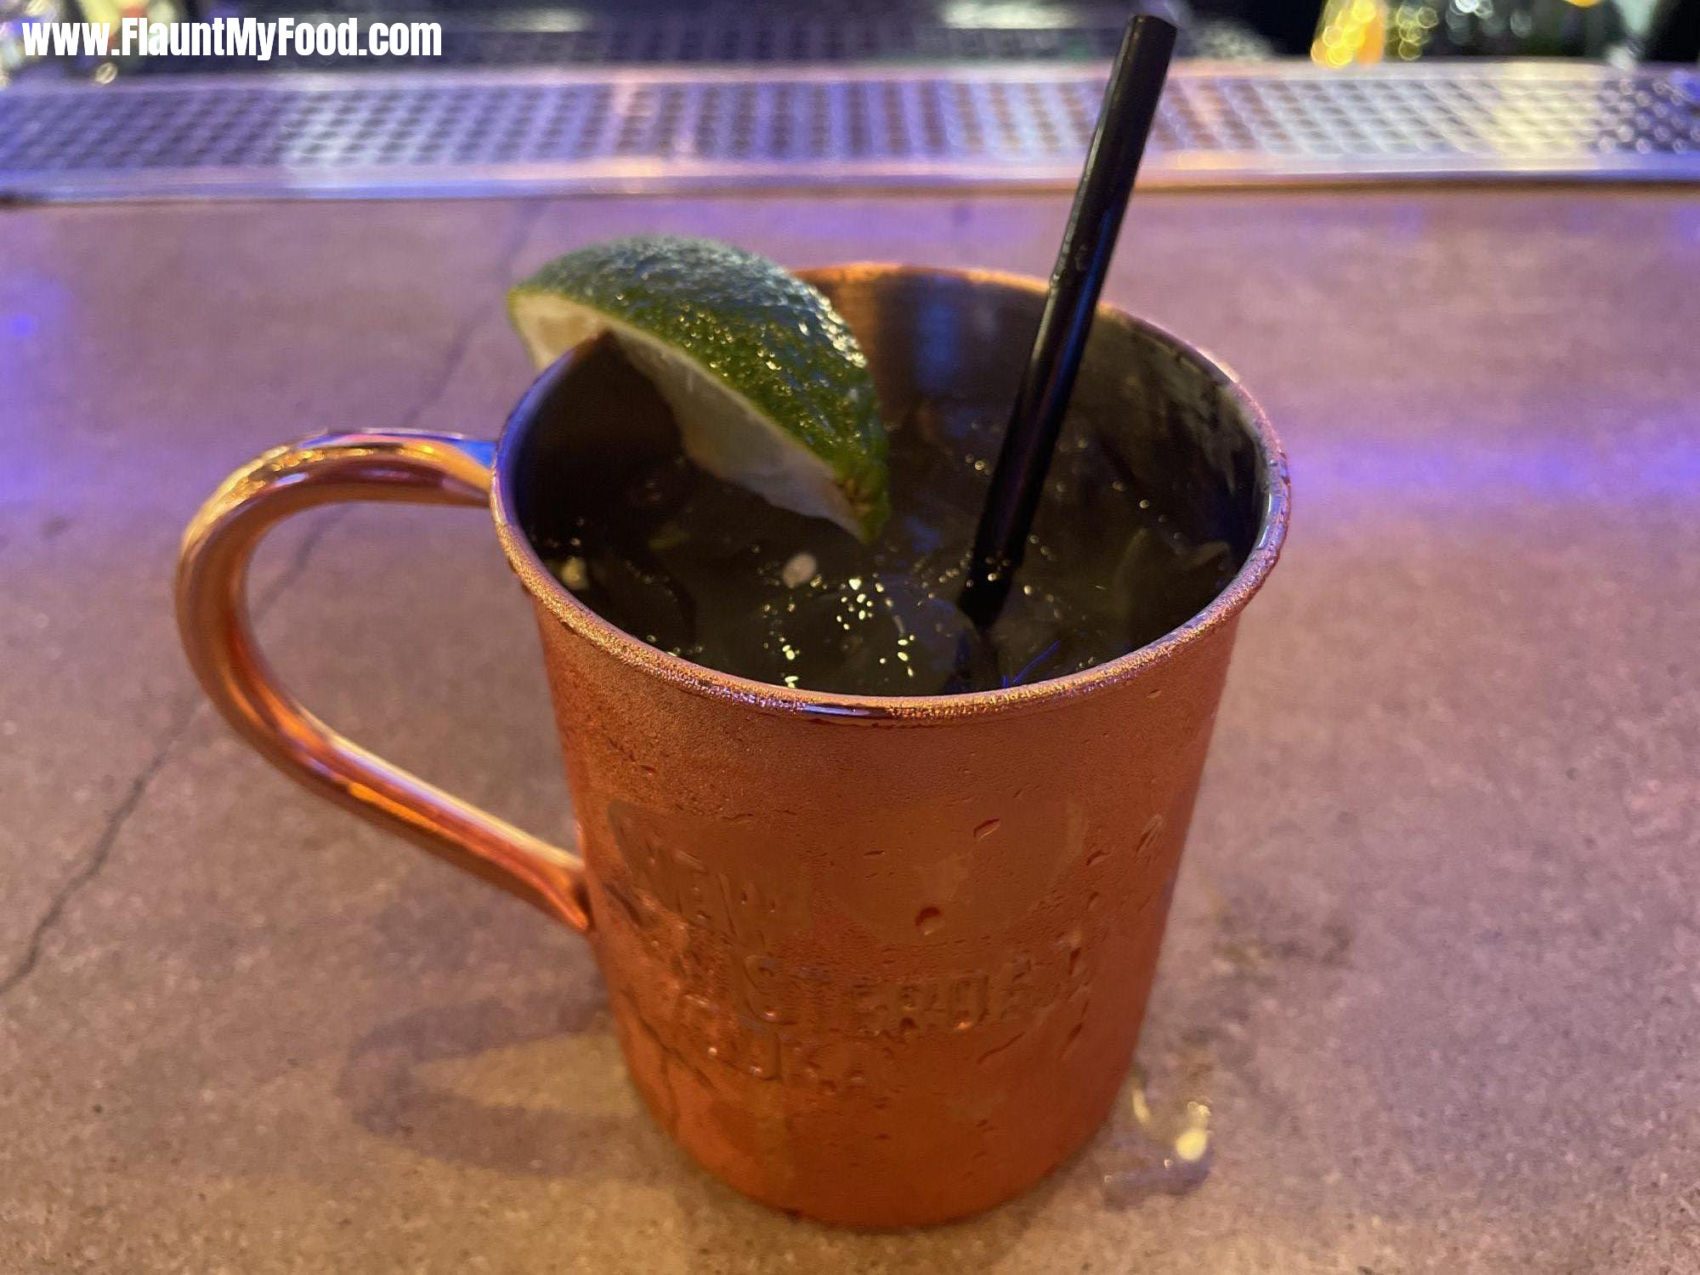 Mexican mule at the concrete cowboy off of W. 7th St. in Fort Worth Texas